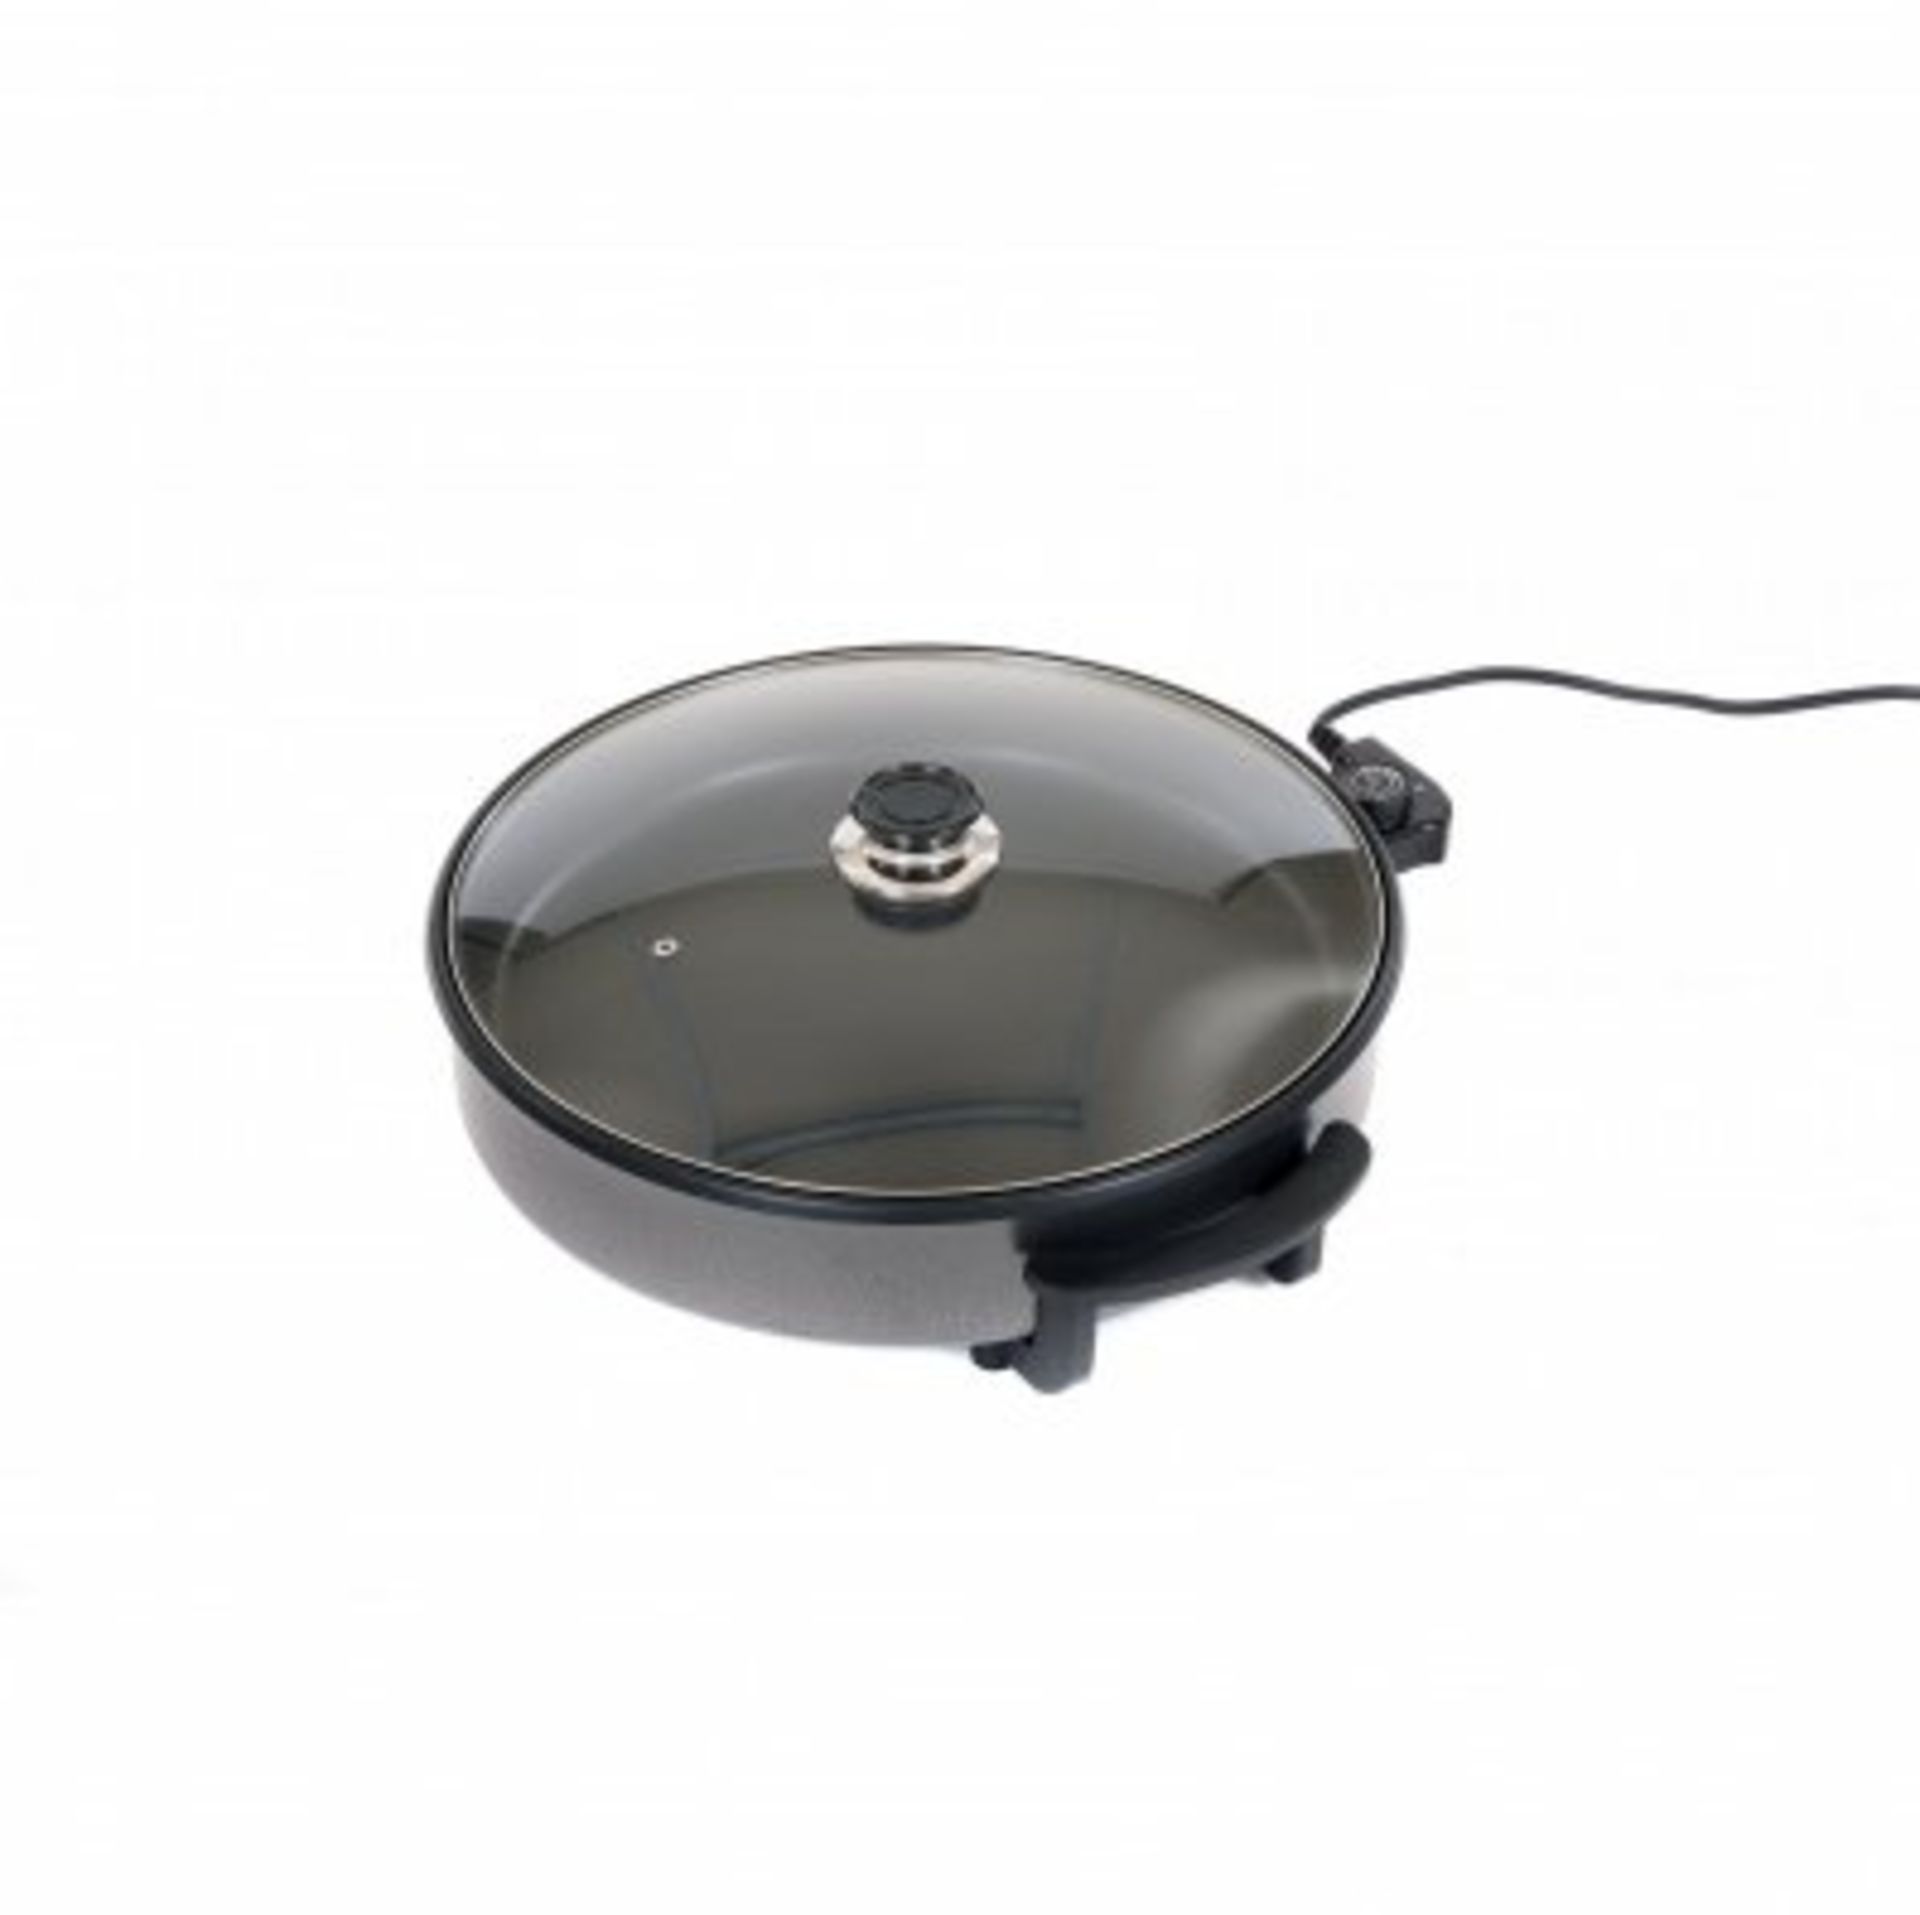 (LF257) 1500W Large Multi Function Electric Cooker Frying Pan with Glass Lid The multicooker...